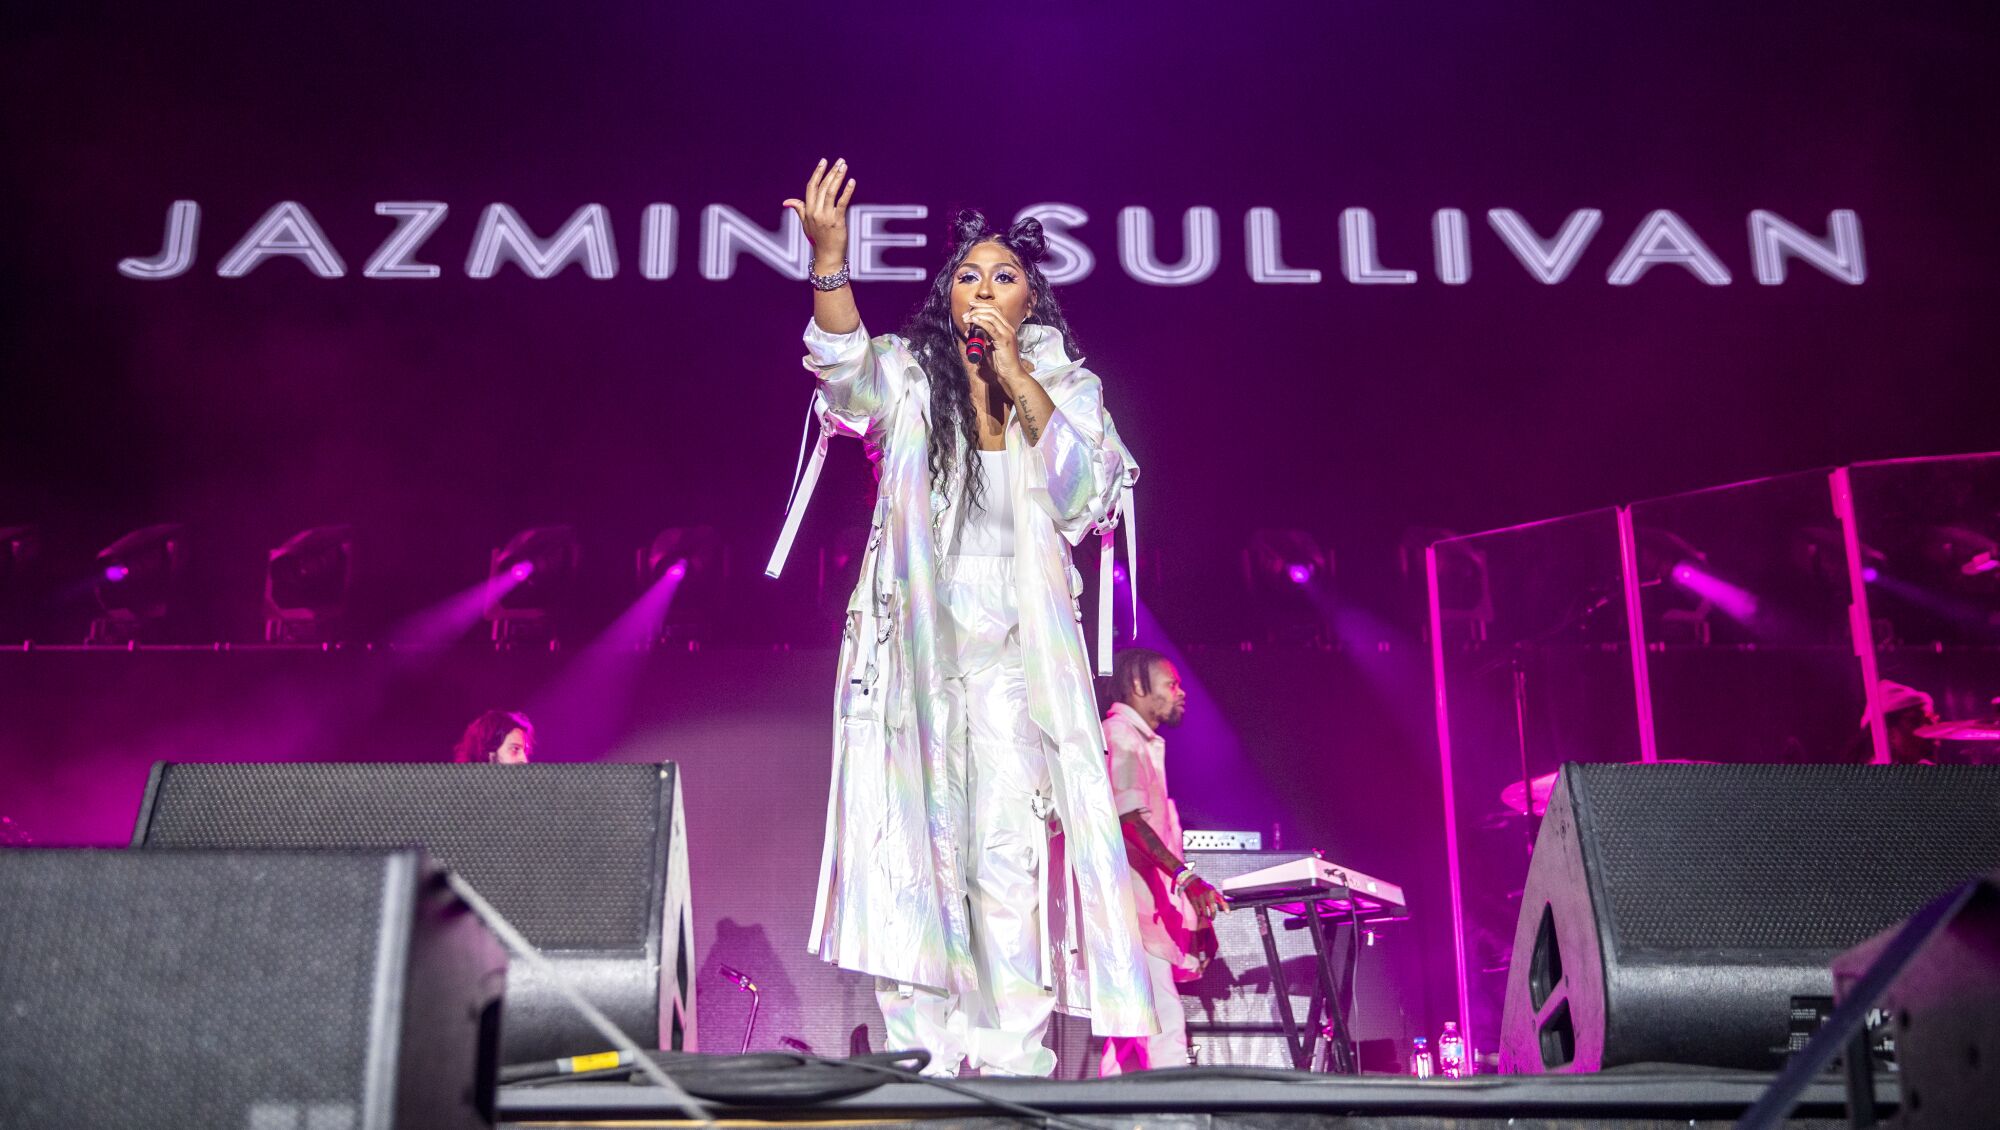 Jazmine Sullivan raises an arm while performing on a stage with her name above the stage.